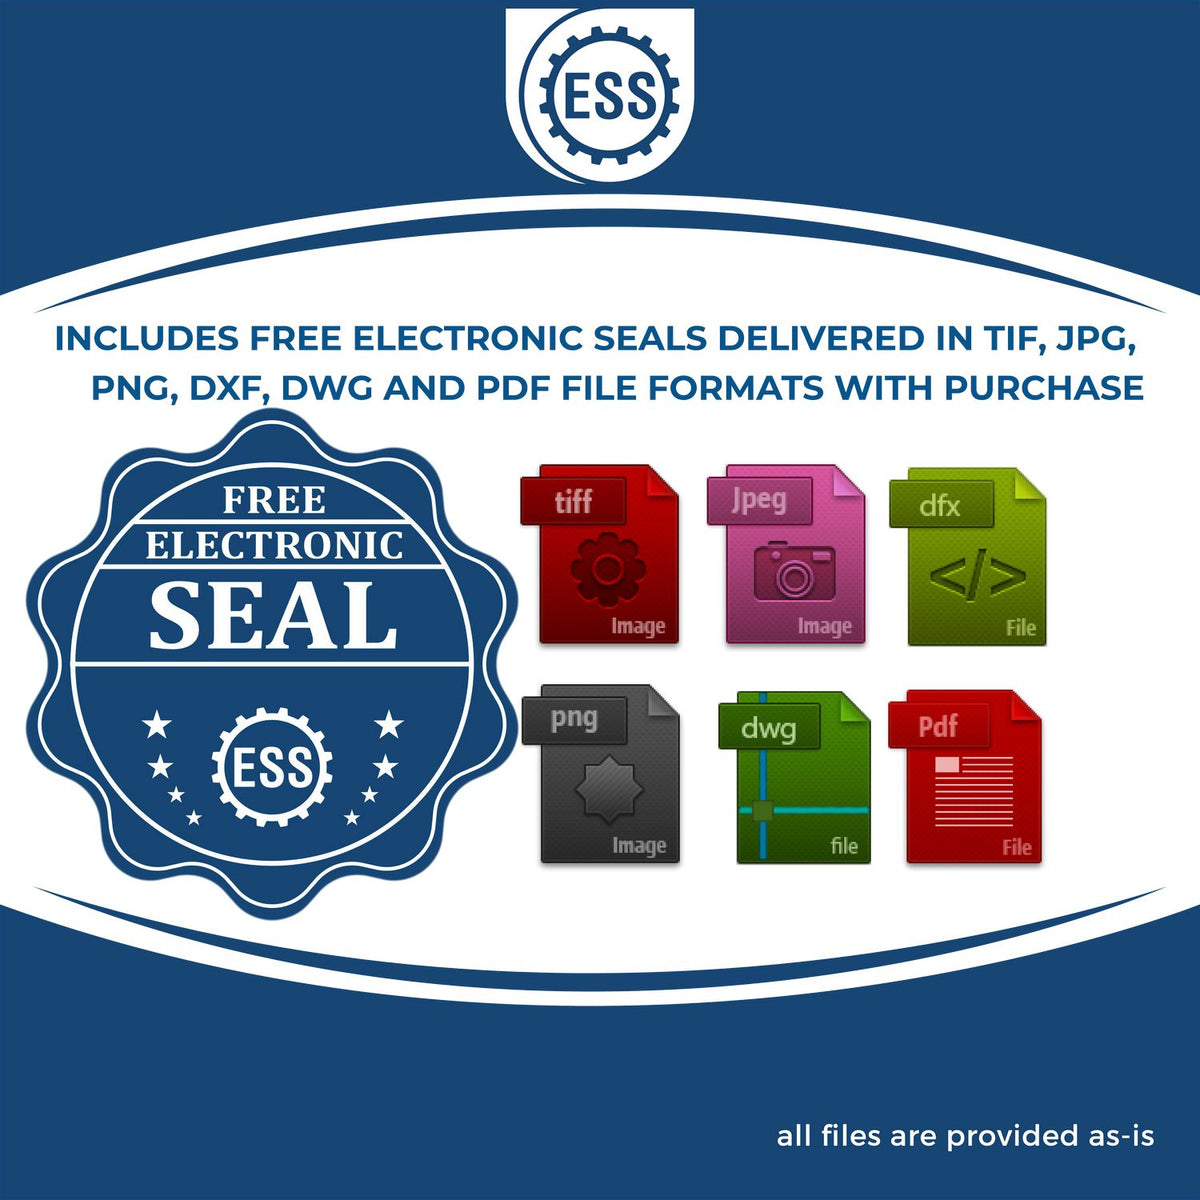 An infographic for the free electronic seal for the Colorado Geologist Desk Seal illustrating the different file type icons such as DXF, DWG, TIF, JPG and PNG.